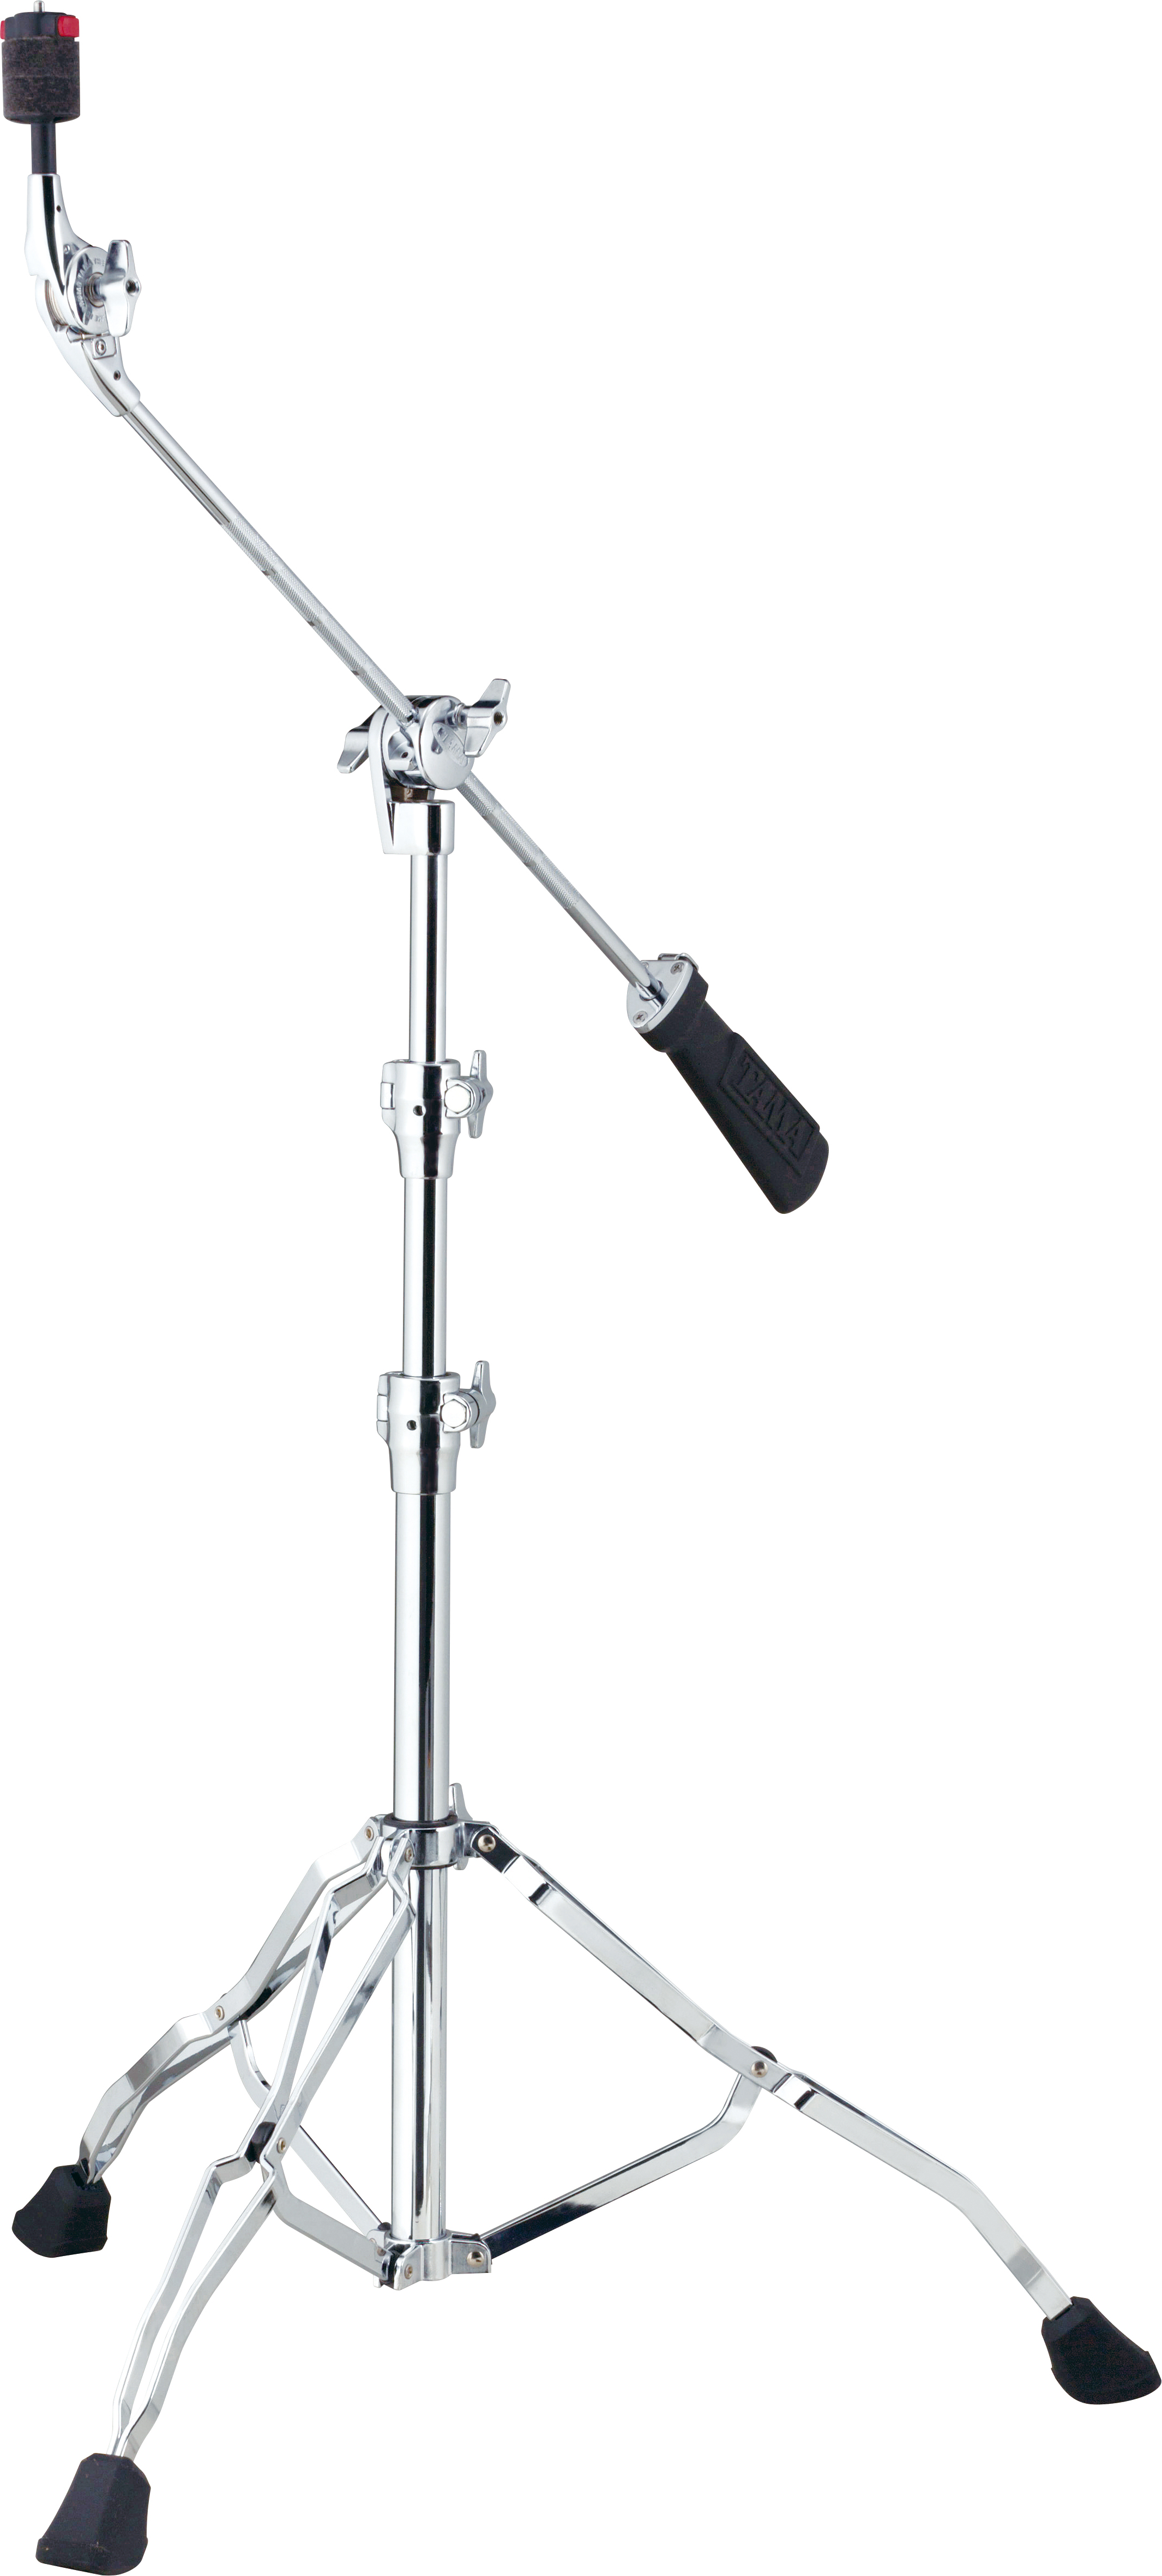 Tama Hc84bw Tam Boom Cymbal Stand W/weight - Soporte para platillo - Main picture